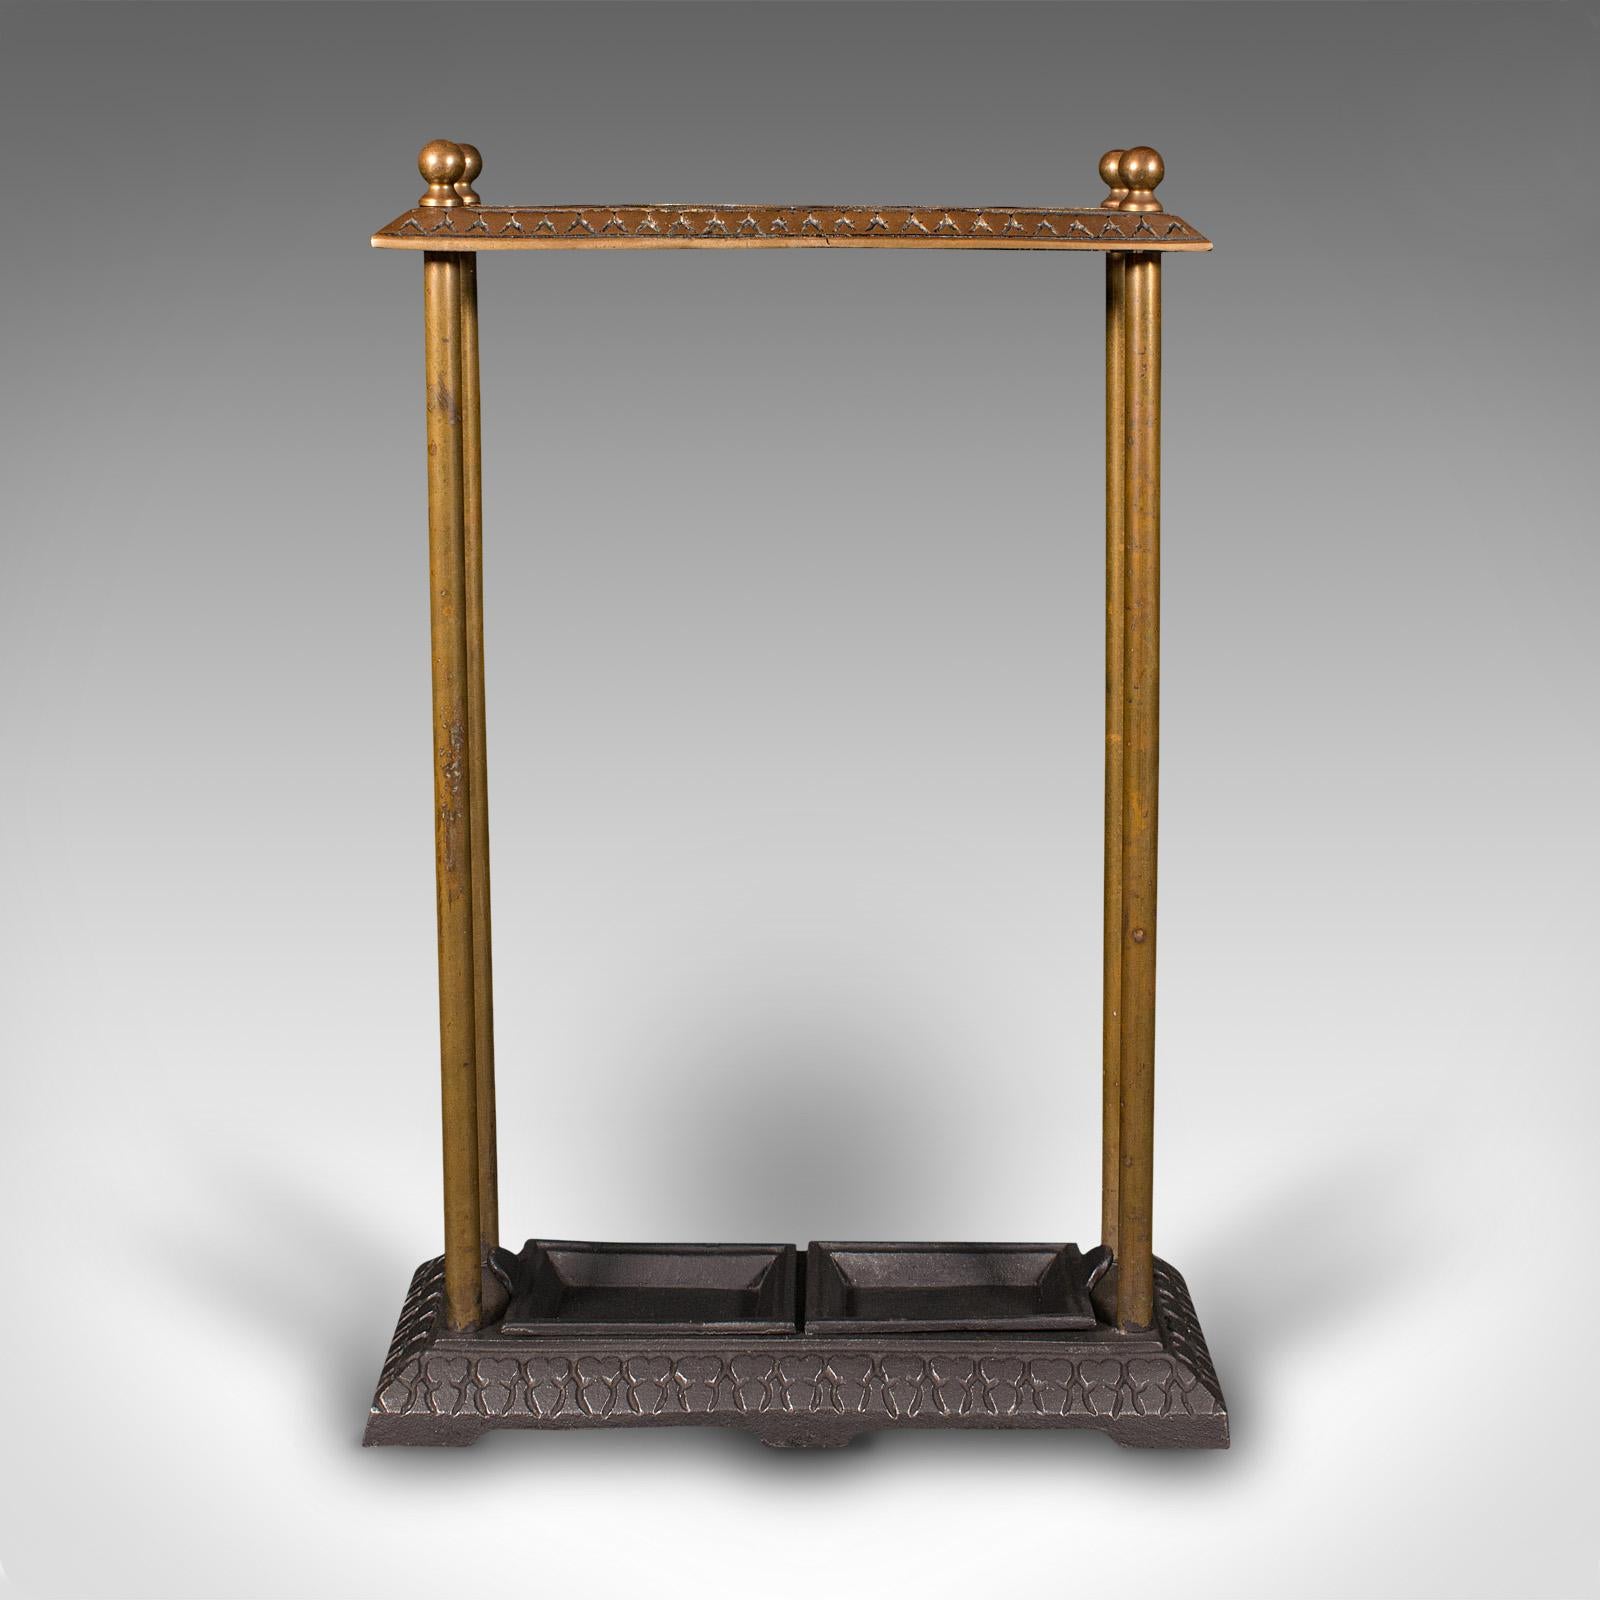 This is an antique sectional umbrella stand. An English, bronze and cast iron hall rack, dating to the late Victorian period, circa 1900.

Rest your wet brollies in late Victorian style within your hall
Displays a desirable aged patina and in